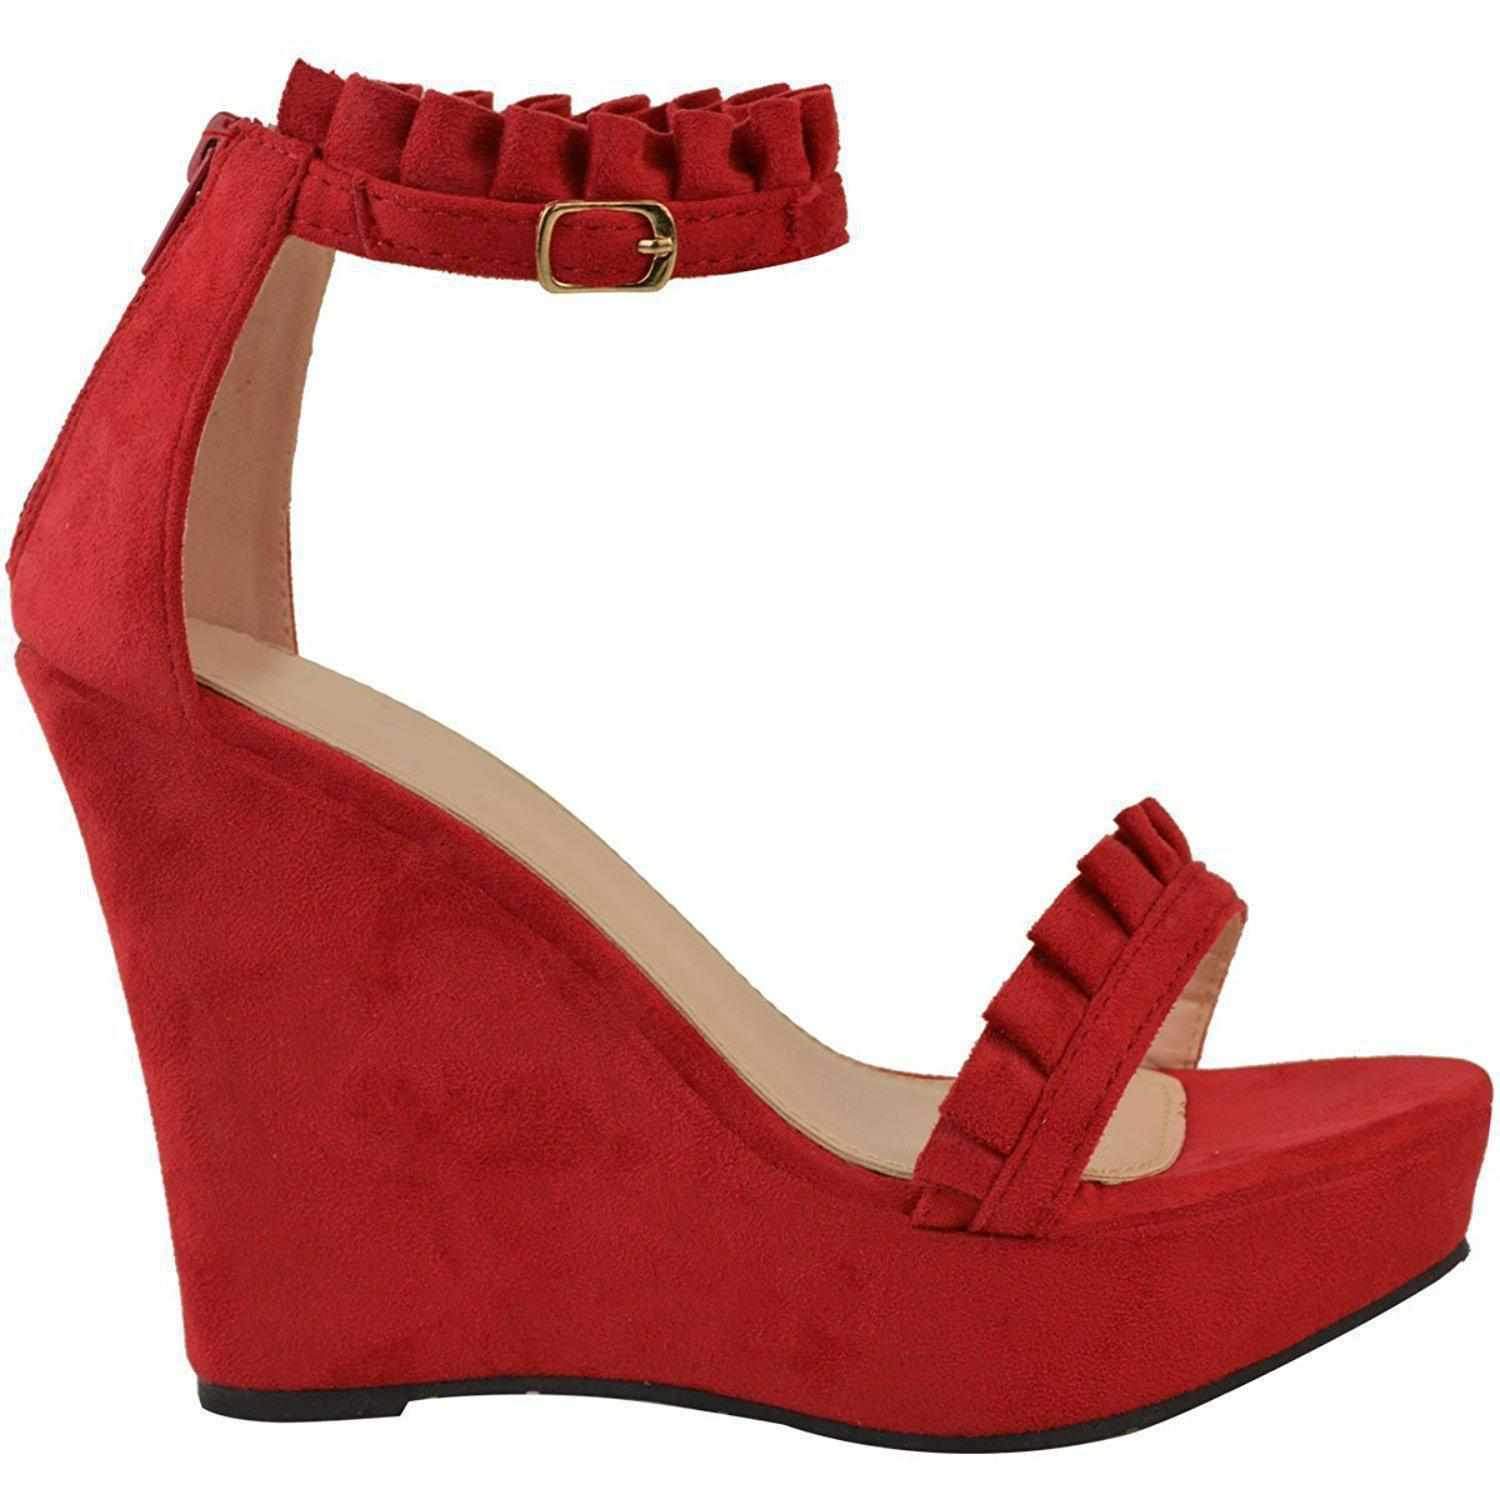 Red Faux Suede Ruffled Platform Wedge | Women's Wedges - Edgy Couture